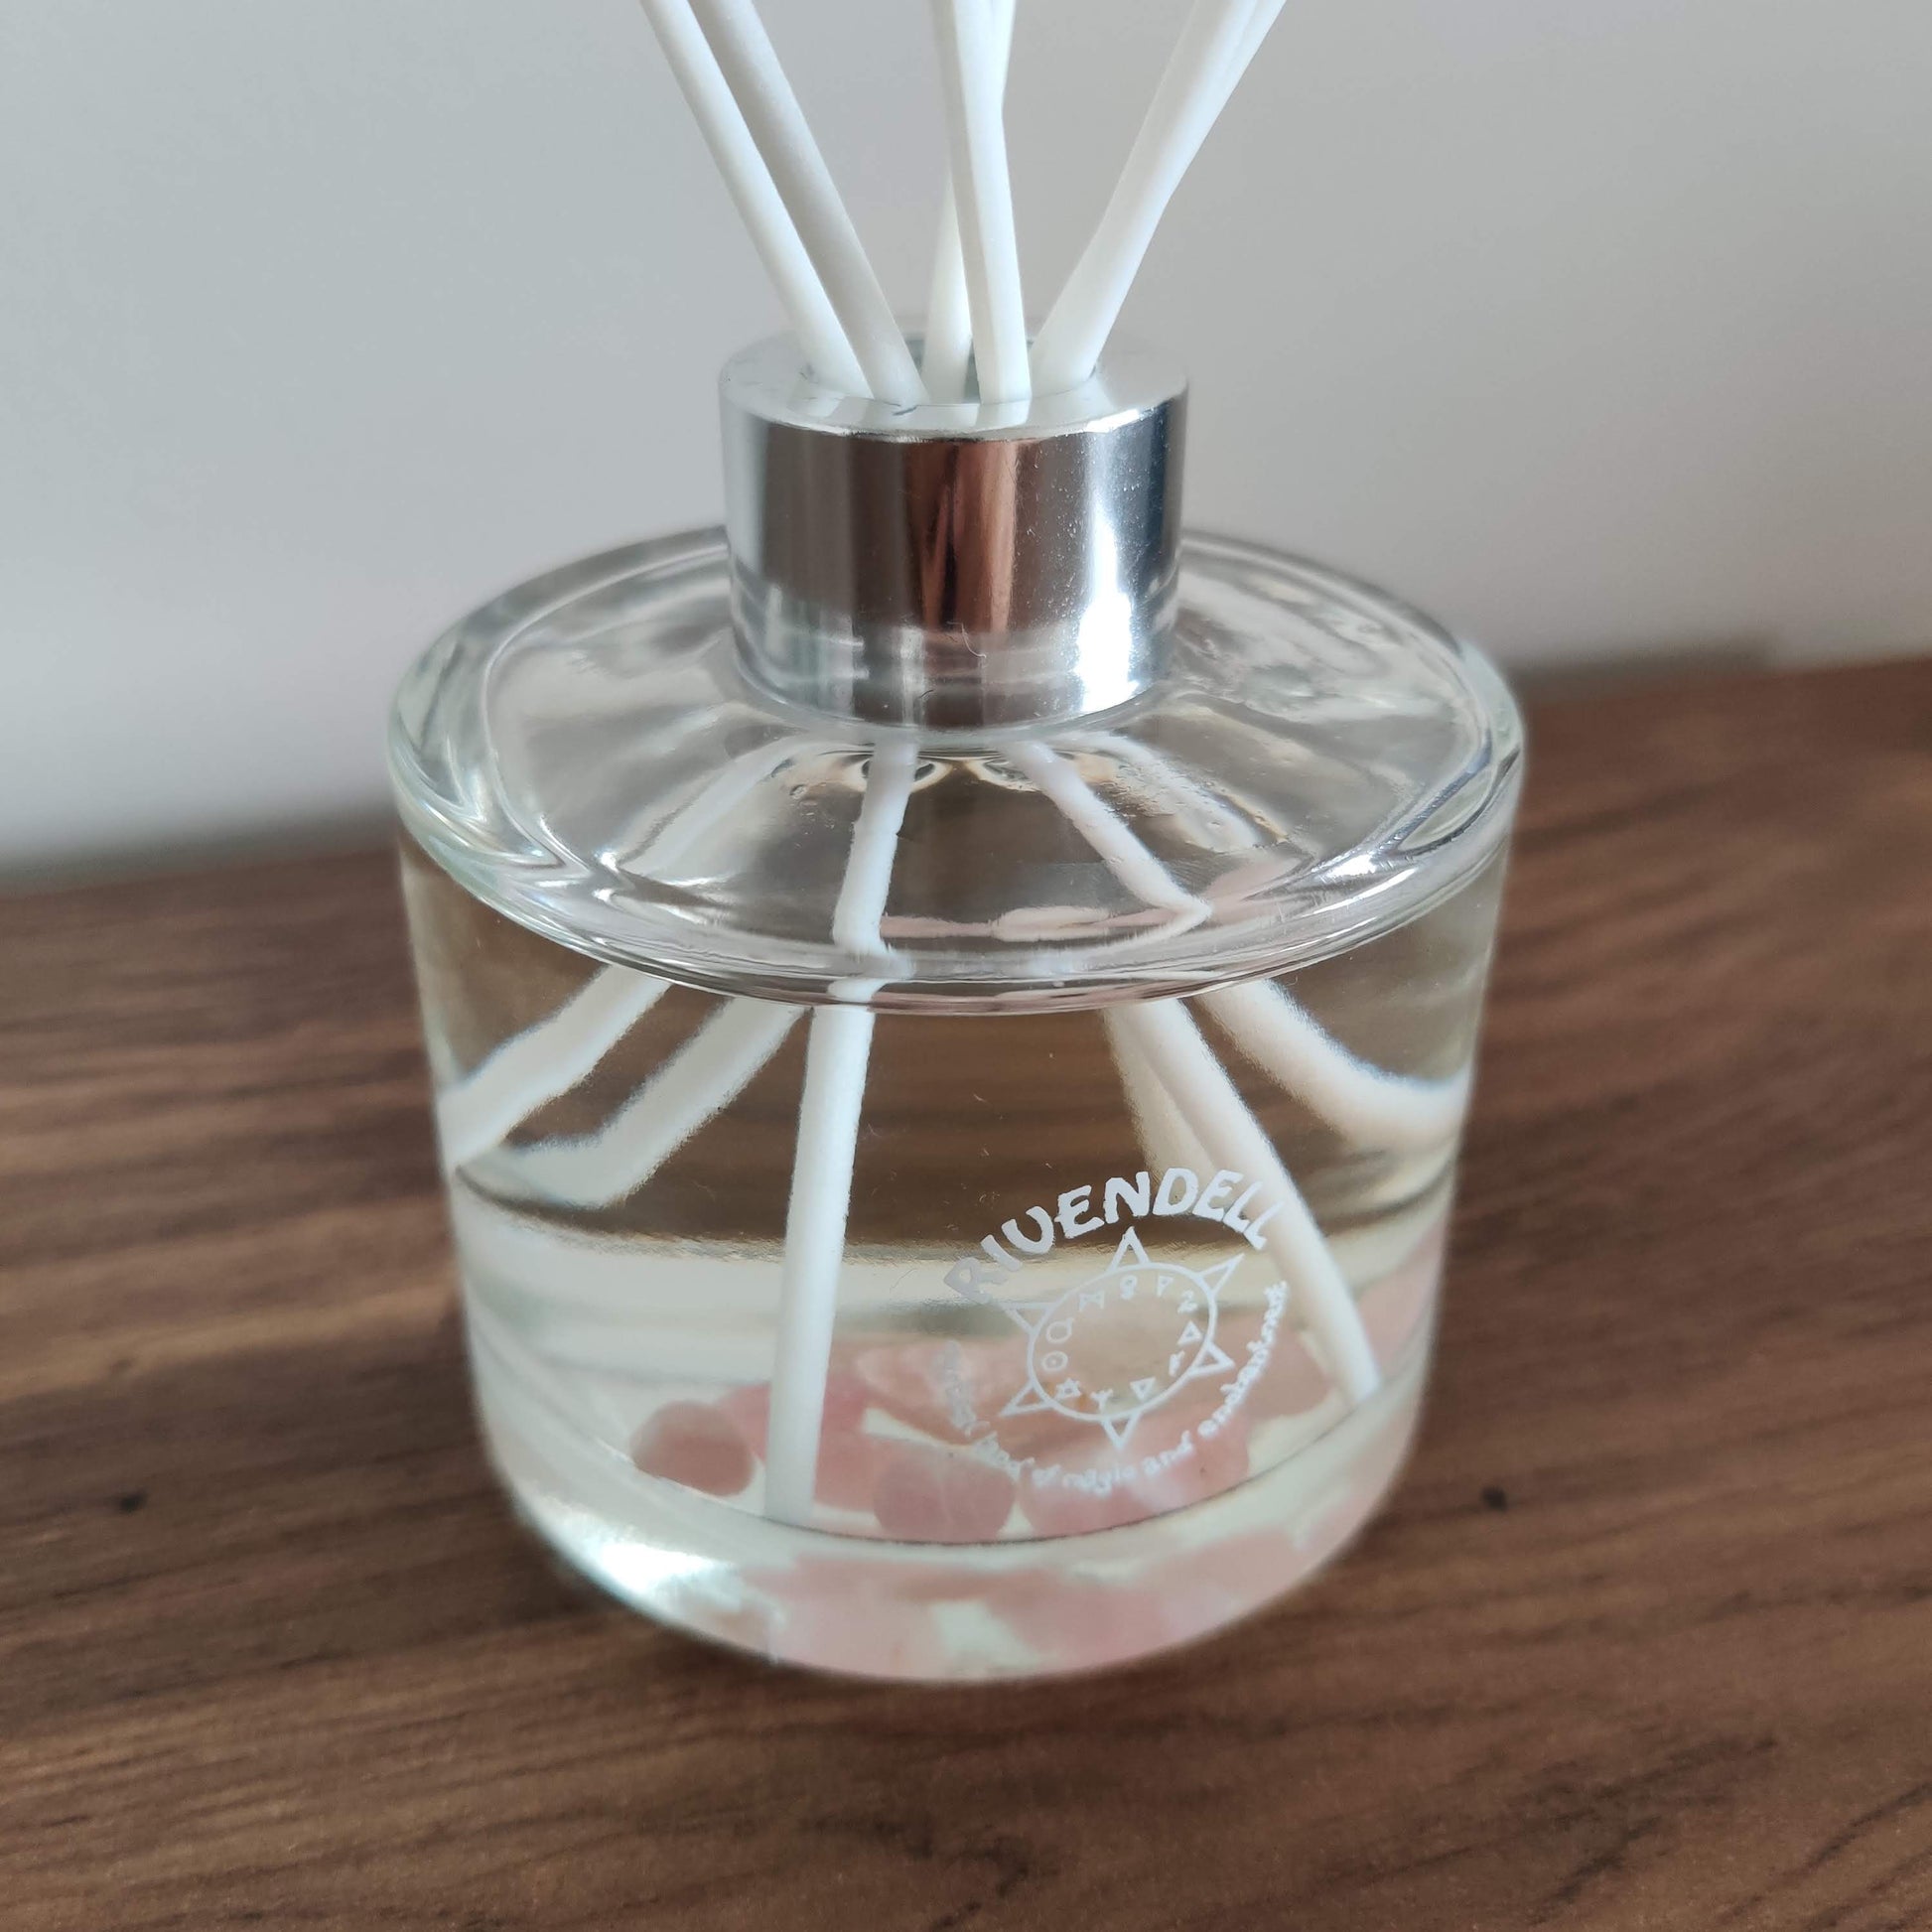 Rivendell Aroma: Rose Quartz x Lavender and Jasmine Crystal-Infused Reed Diffuser - Rivendell Shop